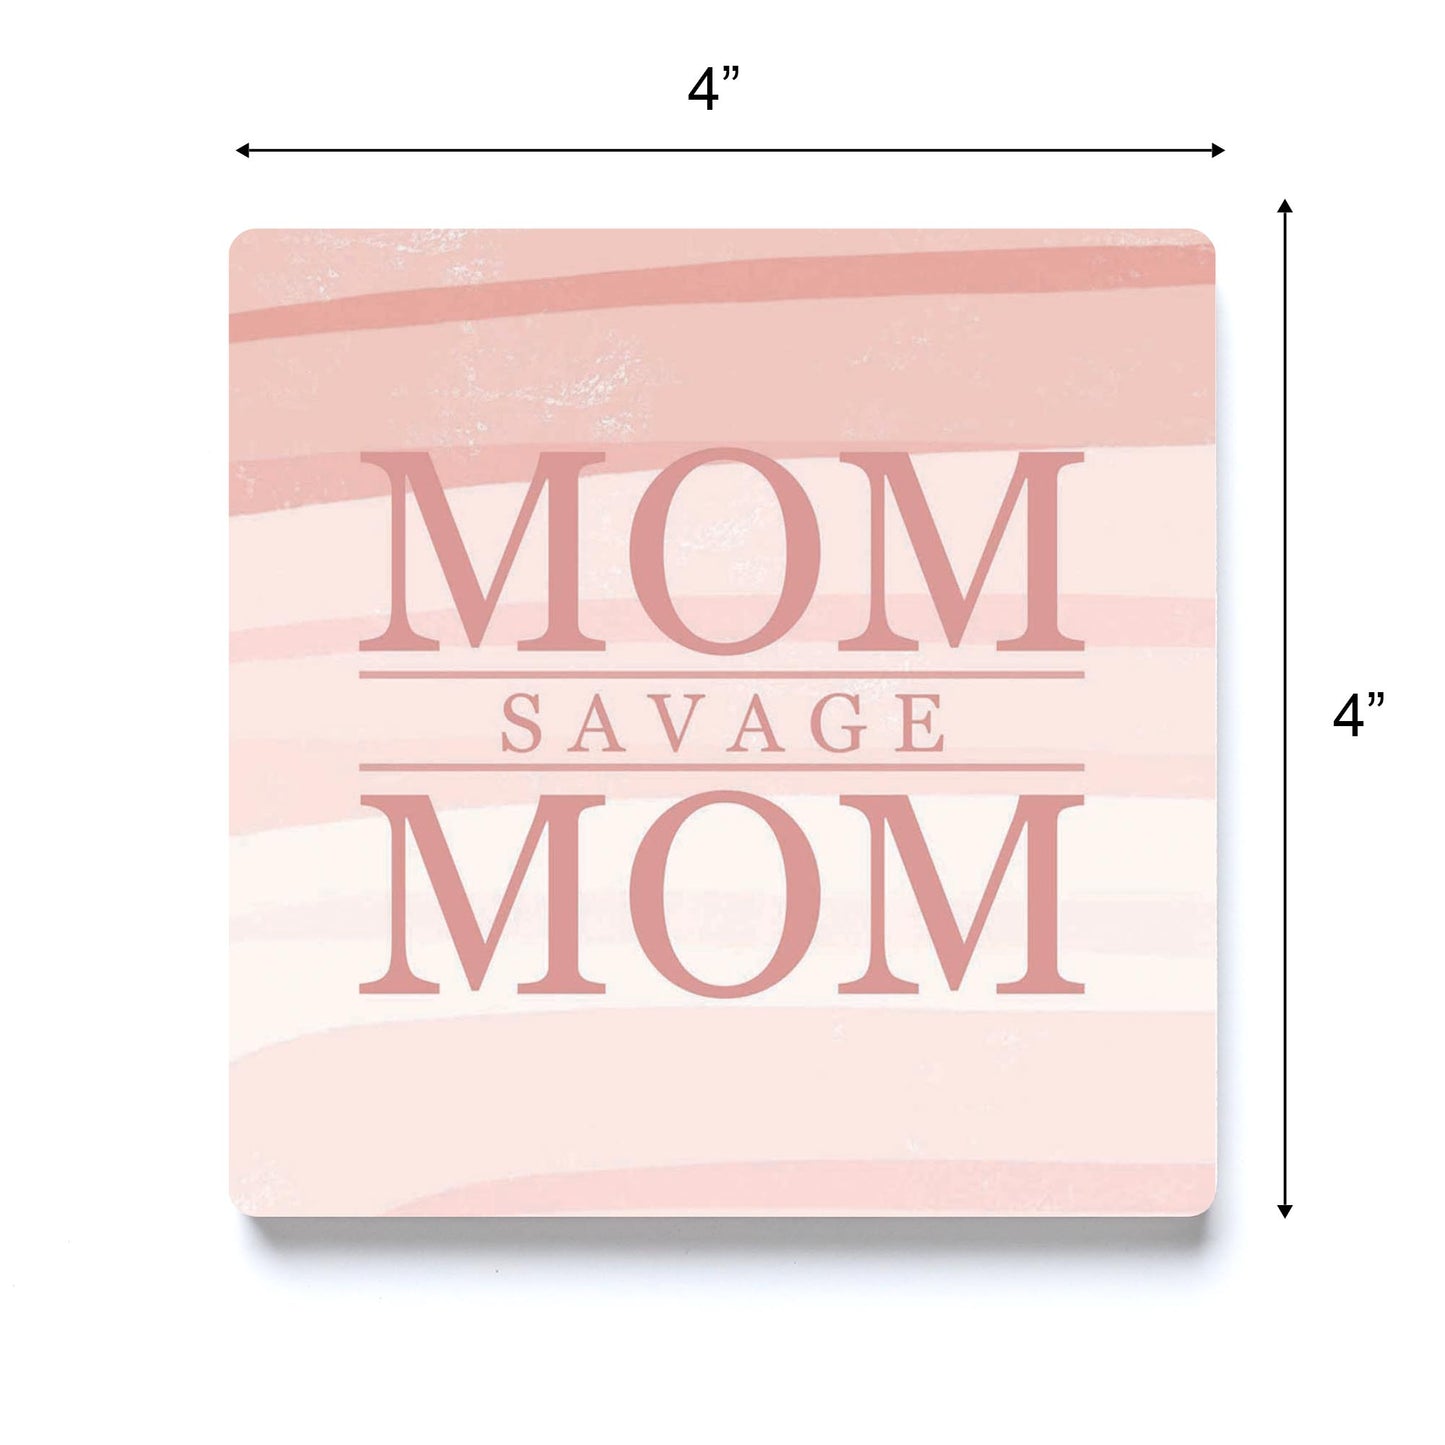 Mother's Day Mom Savage Mom | 4x4